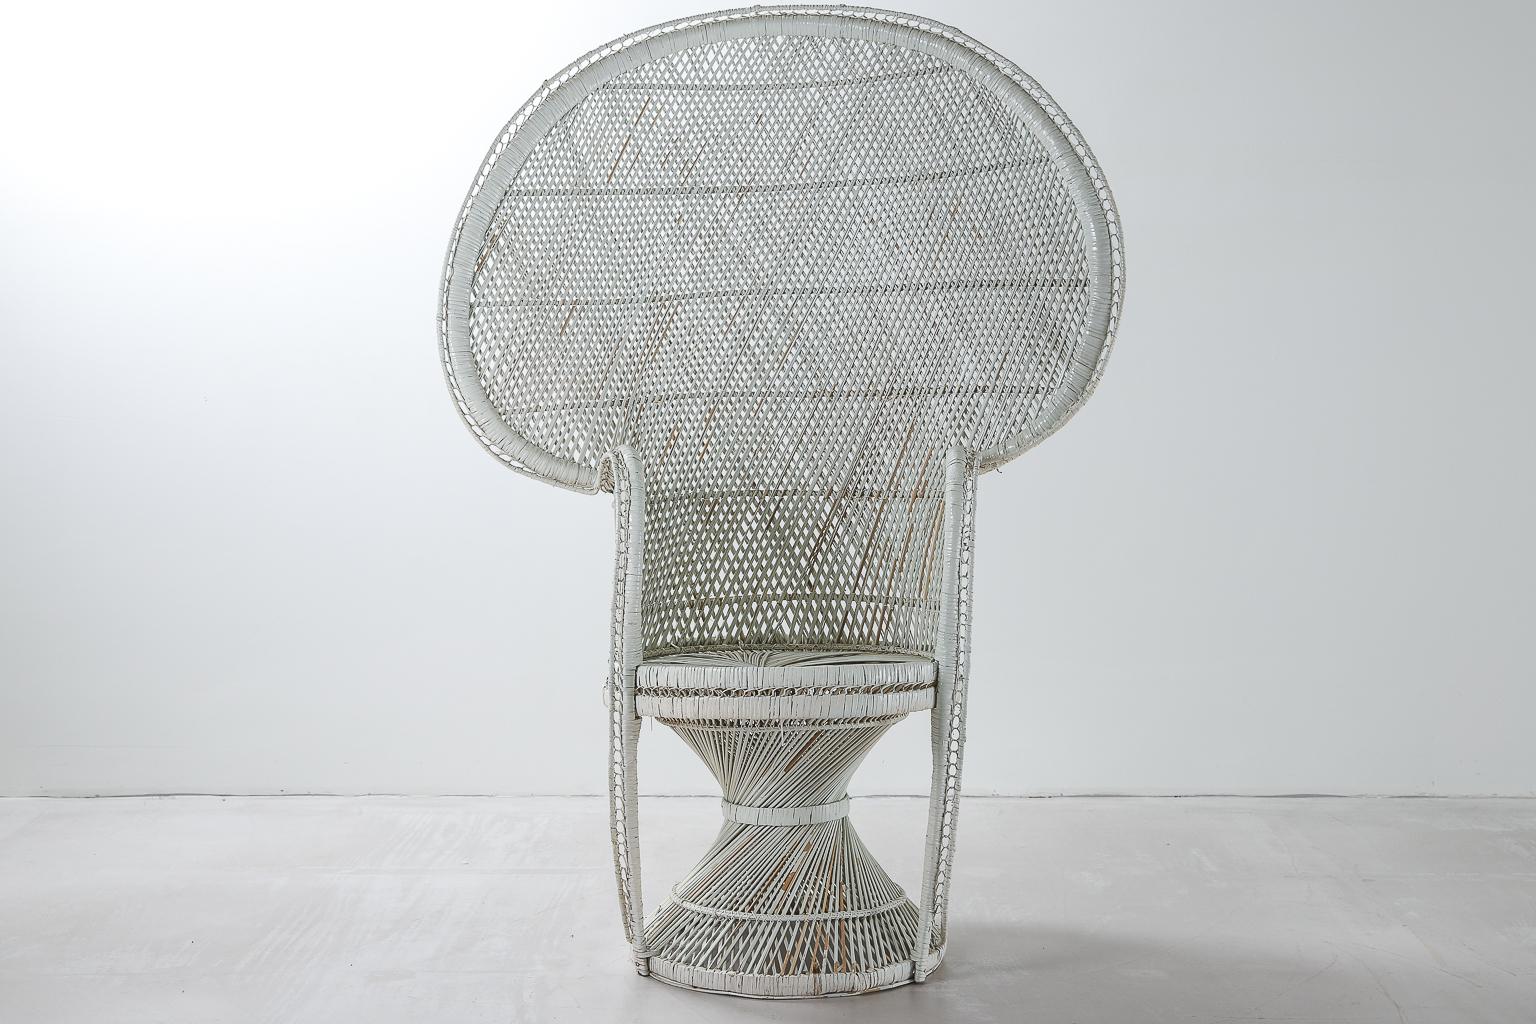 Wicker peacock chair in the style of the iconic Emmanuelle chair.

White twist base wicker peacock chair with a dramatic, chic and stylish design, Classic period form.

  